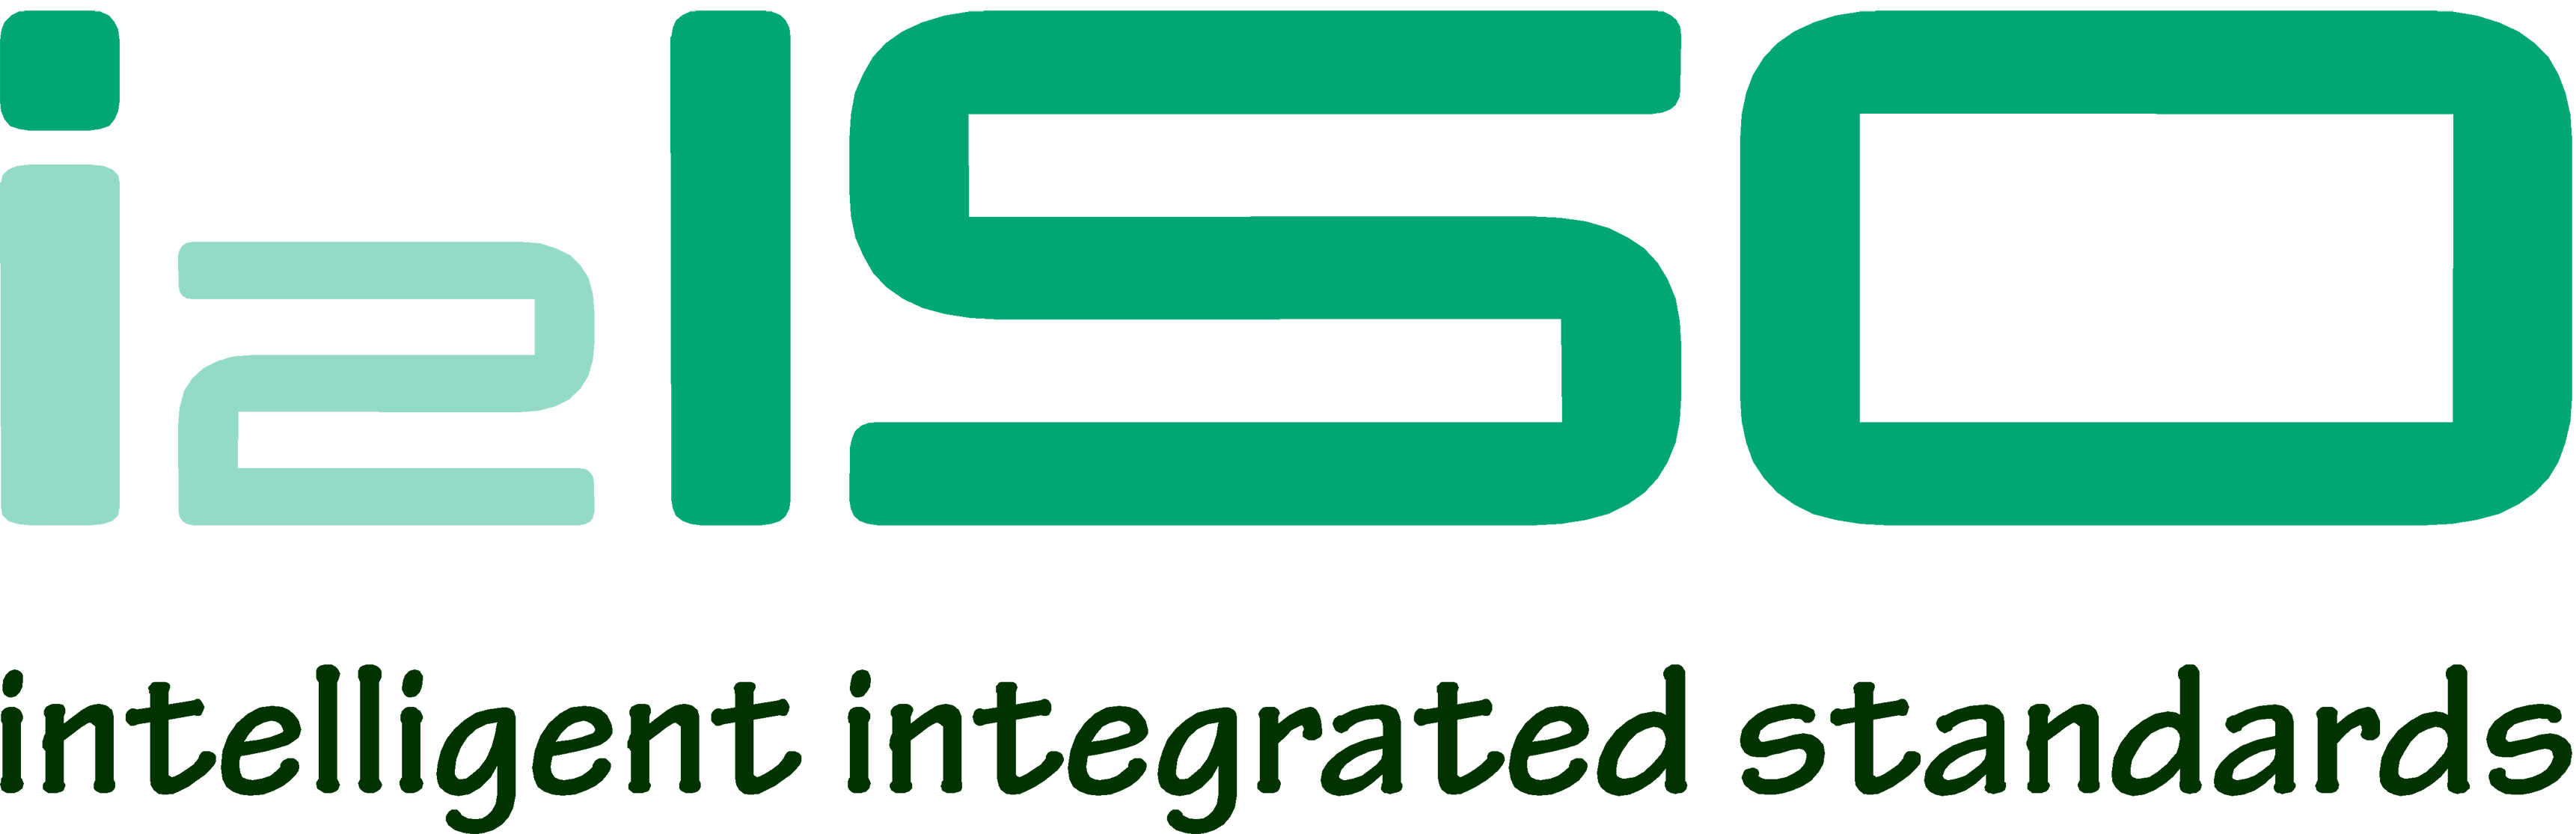 i2ISO logo with 'intelligent integrated standards' streamline underneath